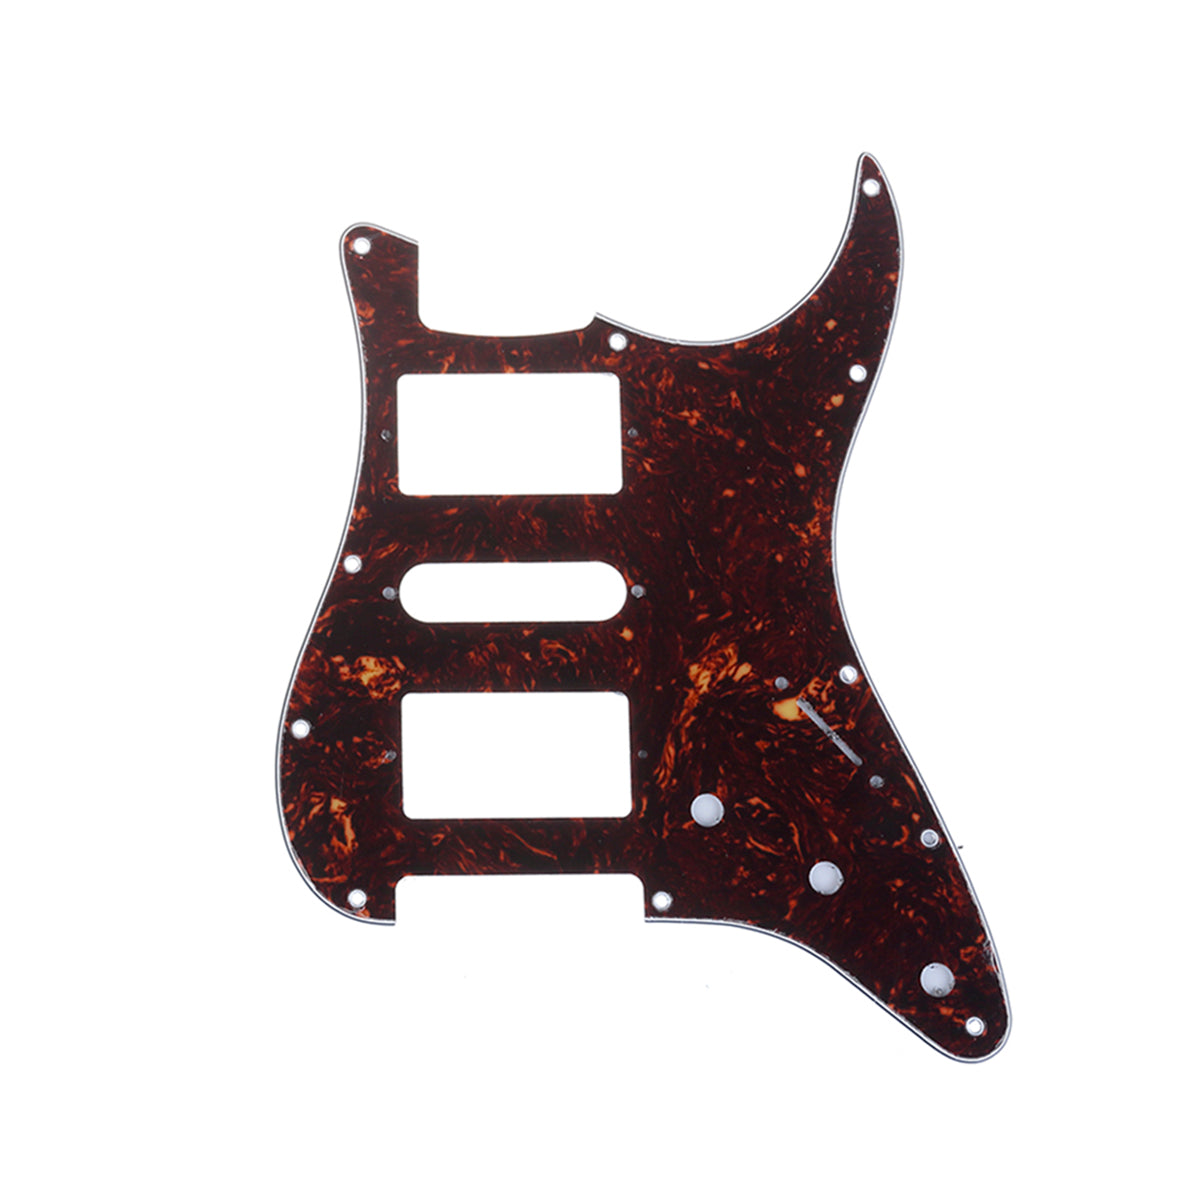 Musiclily Pro 11 Hole HSH Guitar Strat Pickguard for Fender American/Mexican Standard Stratocaster Modern Style, 4Ply Tortoise Shell